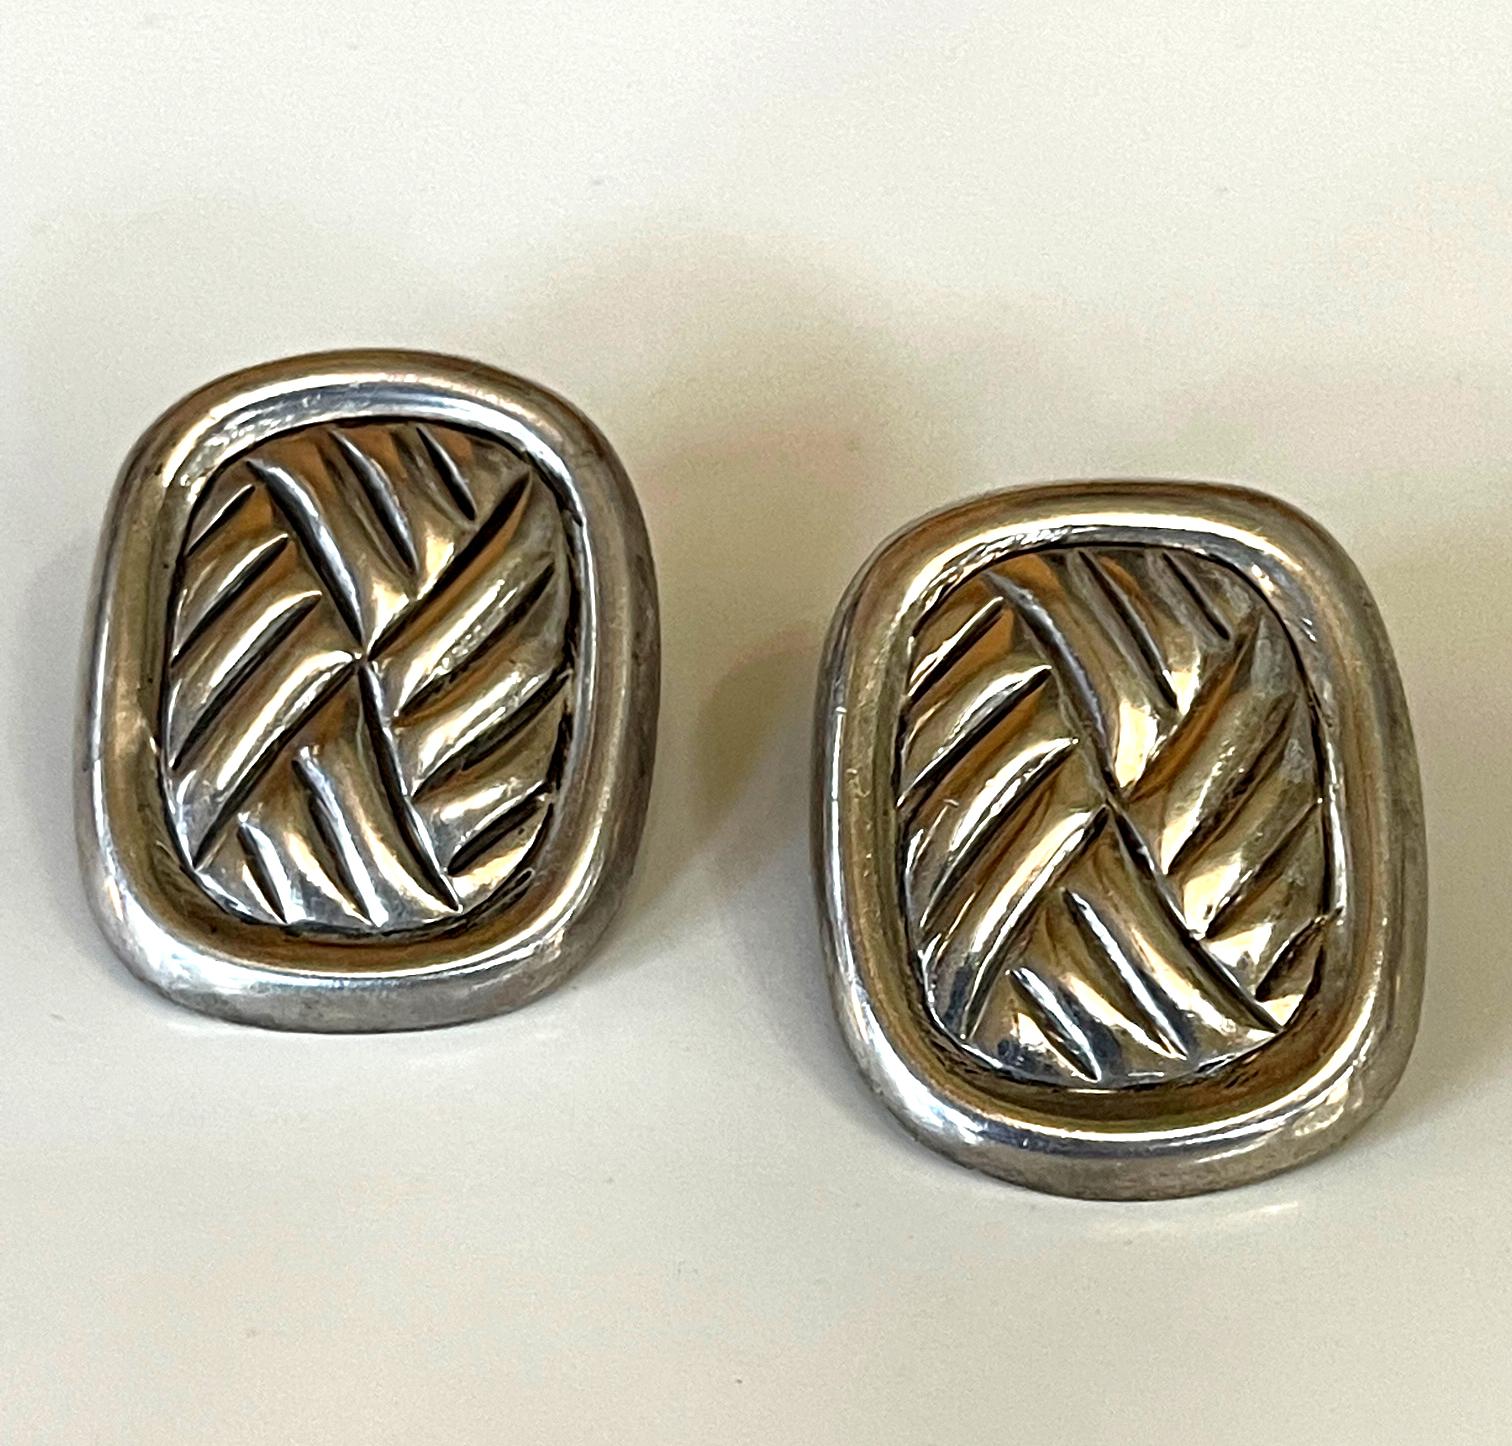 A pair of modernistic sterling silver earring by William Spratling from the third period 1964-1967. Made in his studio in Taxco, Mexico. The earring features an abstract woven motif within a border, inspired by indigenous basketry. Each stamped